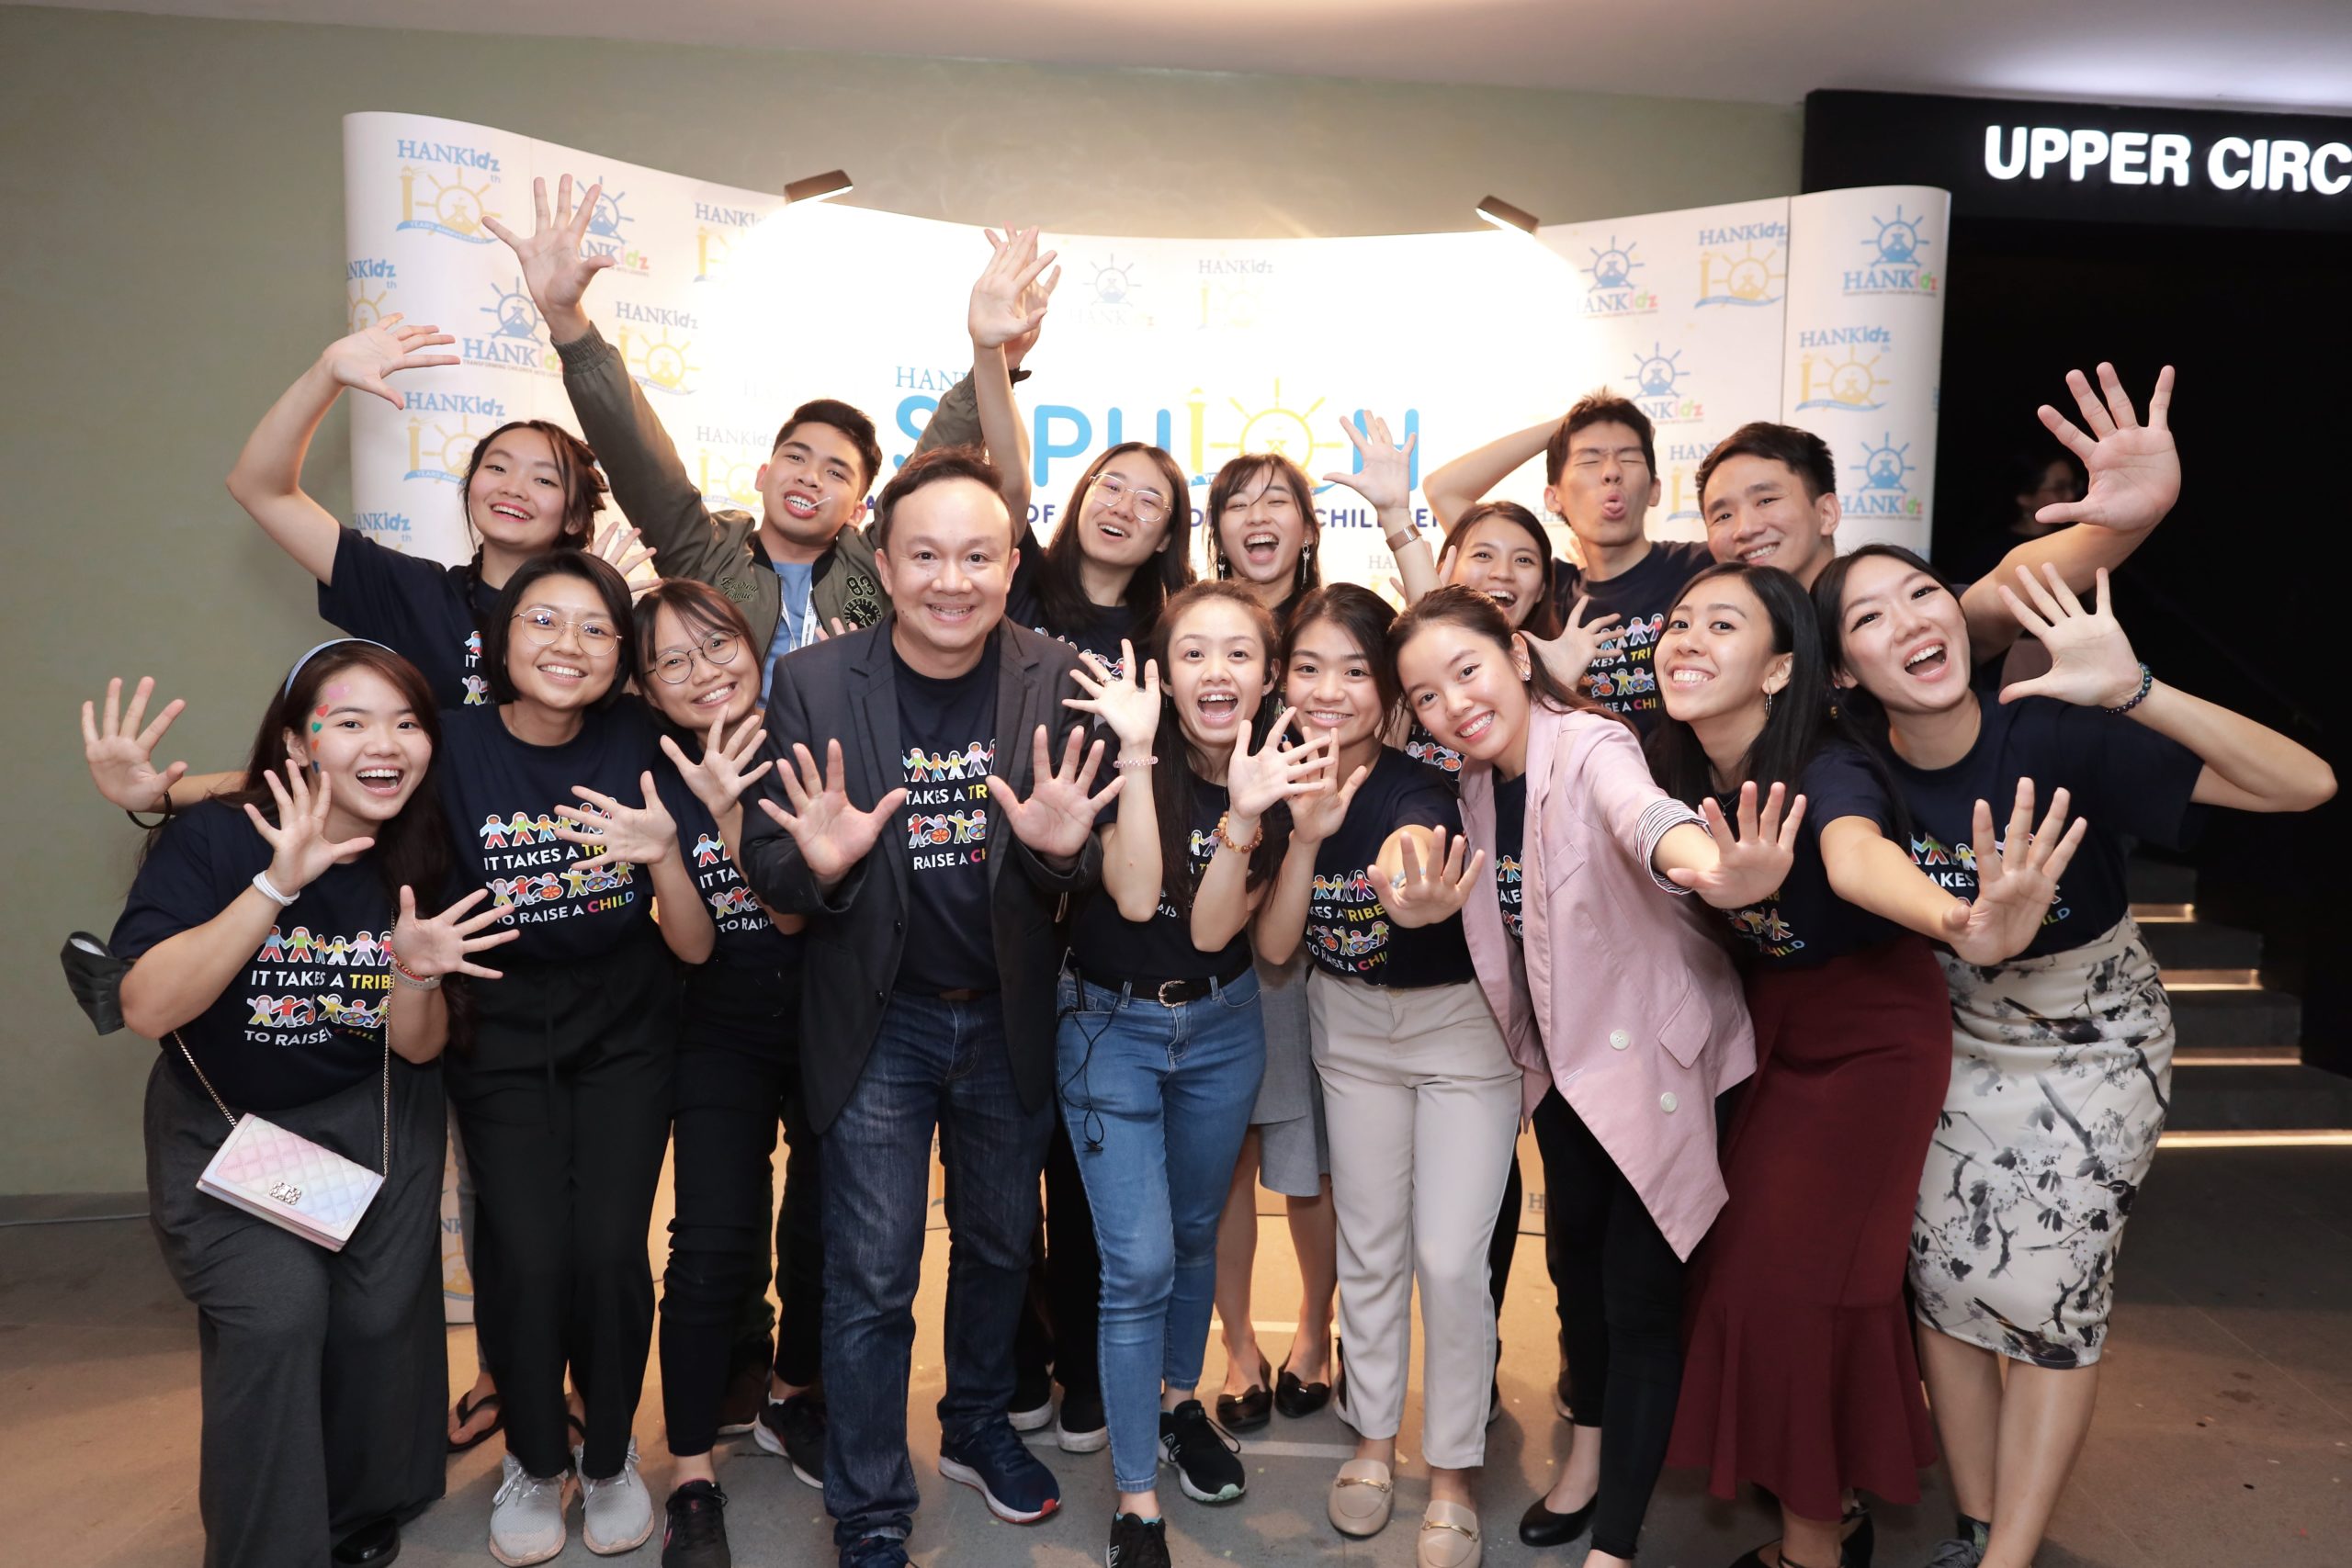 Hankidz celebrates its 10th anniversary of cultivating leadership skills for children in asia | weirdkaya